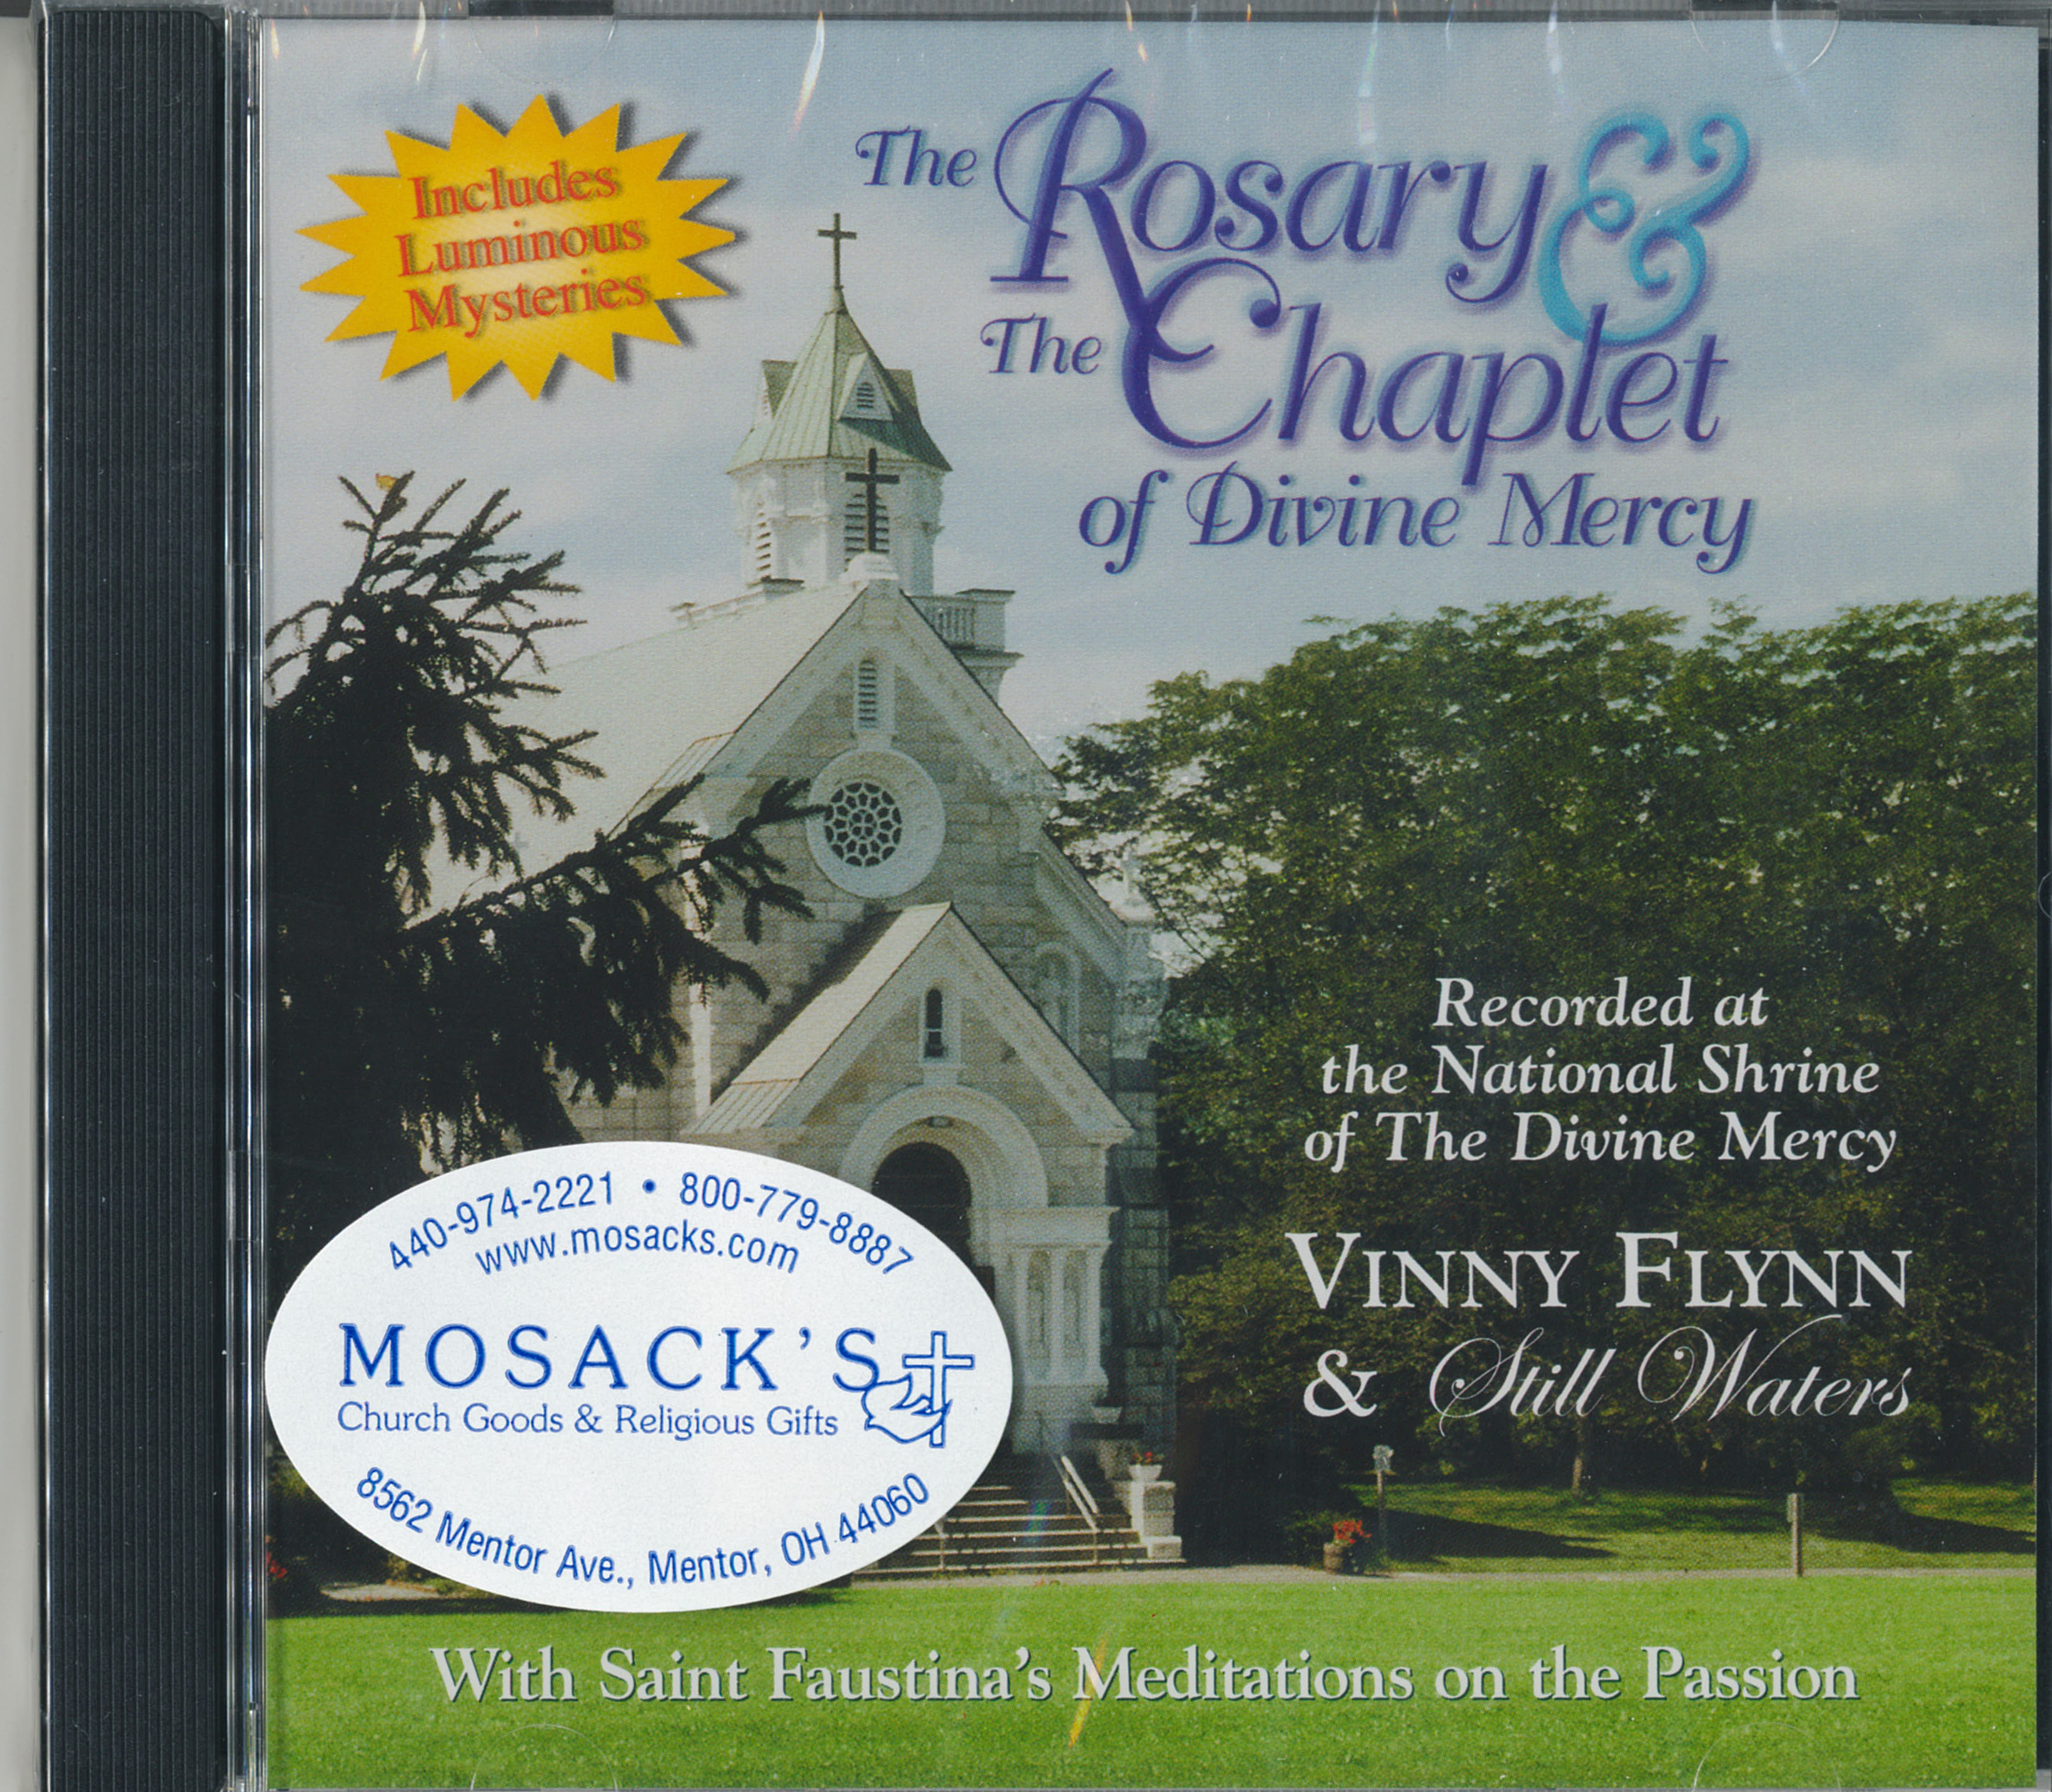 CD The Rosary & The Chaplet of Divine Mercy 1884479154 Vinny Flynn & Still Waters